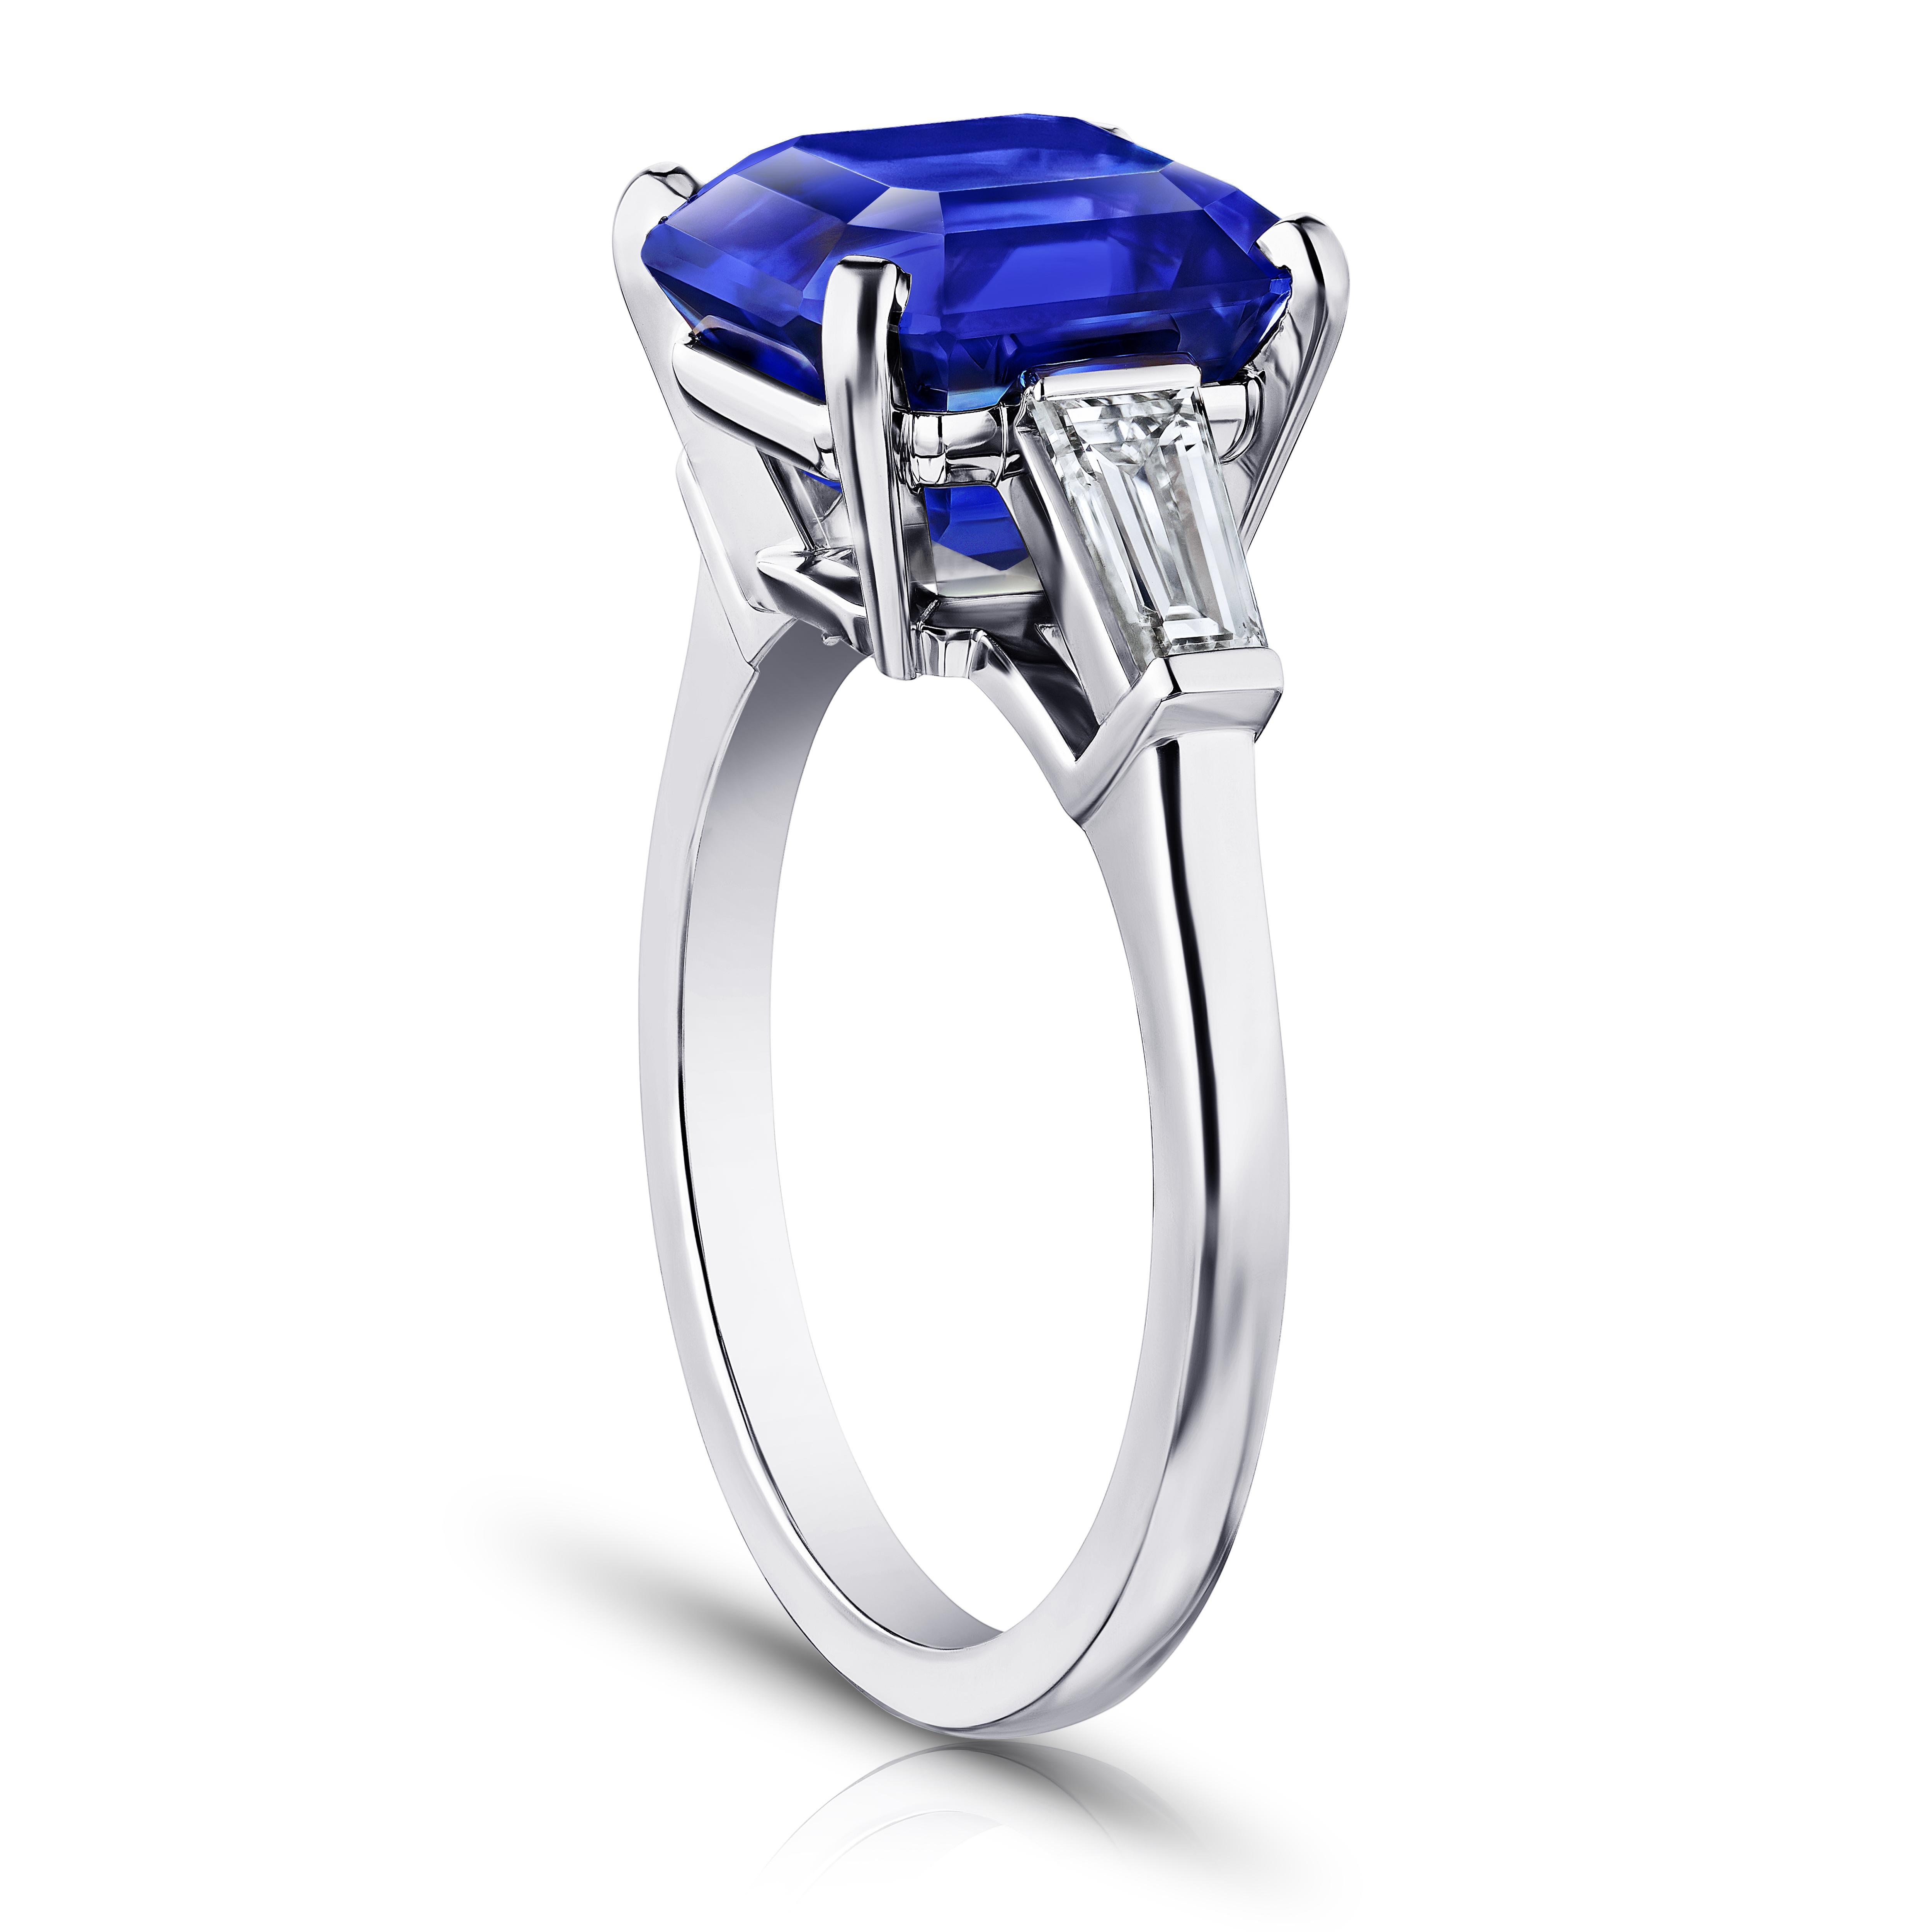 6.16 carat square emerald blue sapphire with tapered baguette diamonds .55 carats set in a platinum ring. Size 7.
